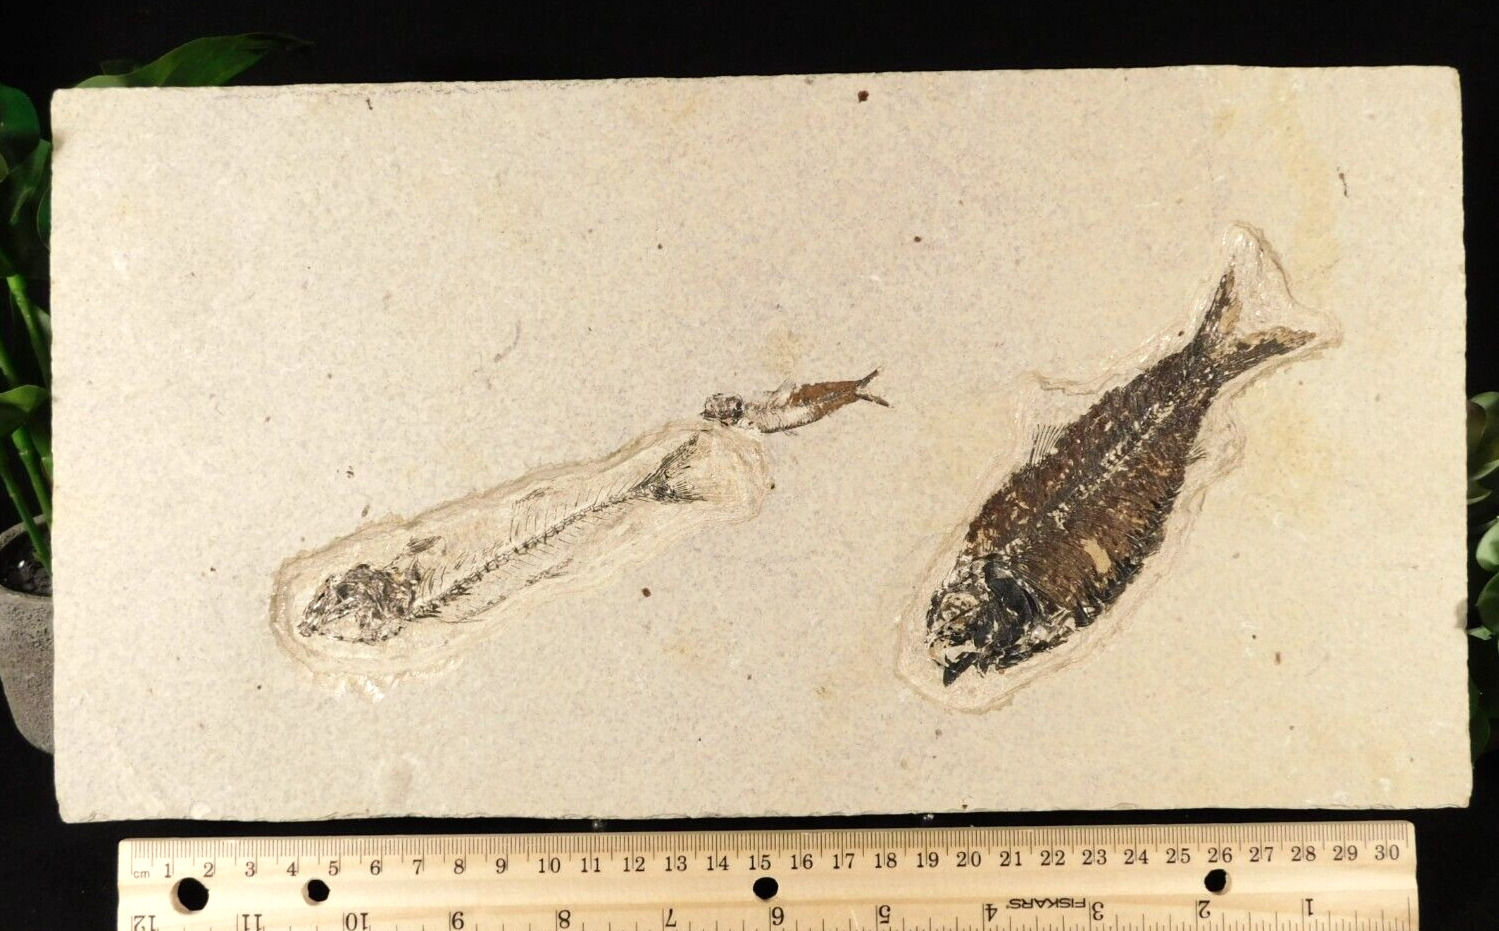 TWO Different Species Mioplosus and Knightia FISH Fossils From Wyoming 1484gr